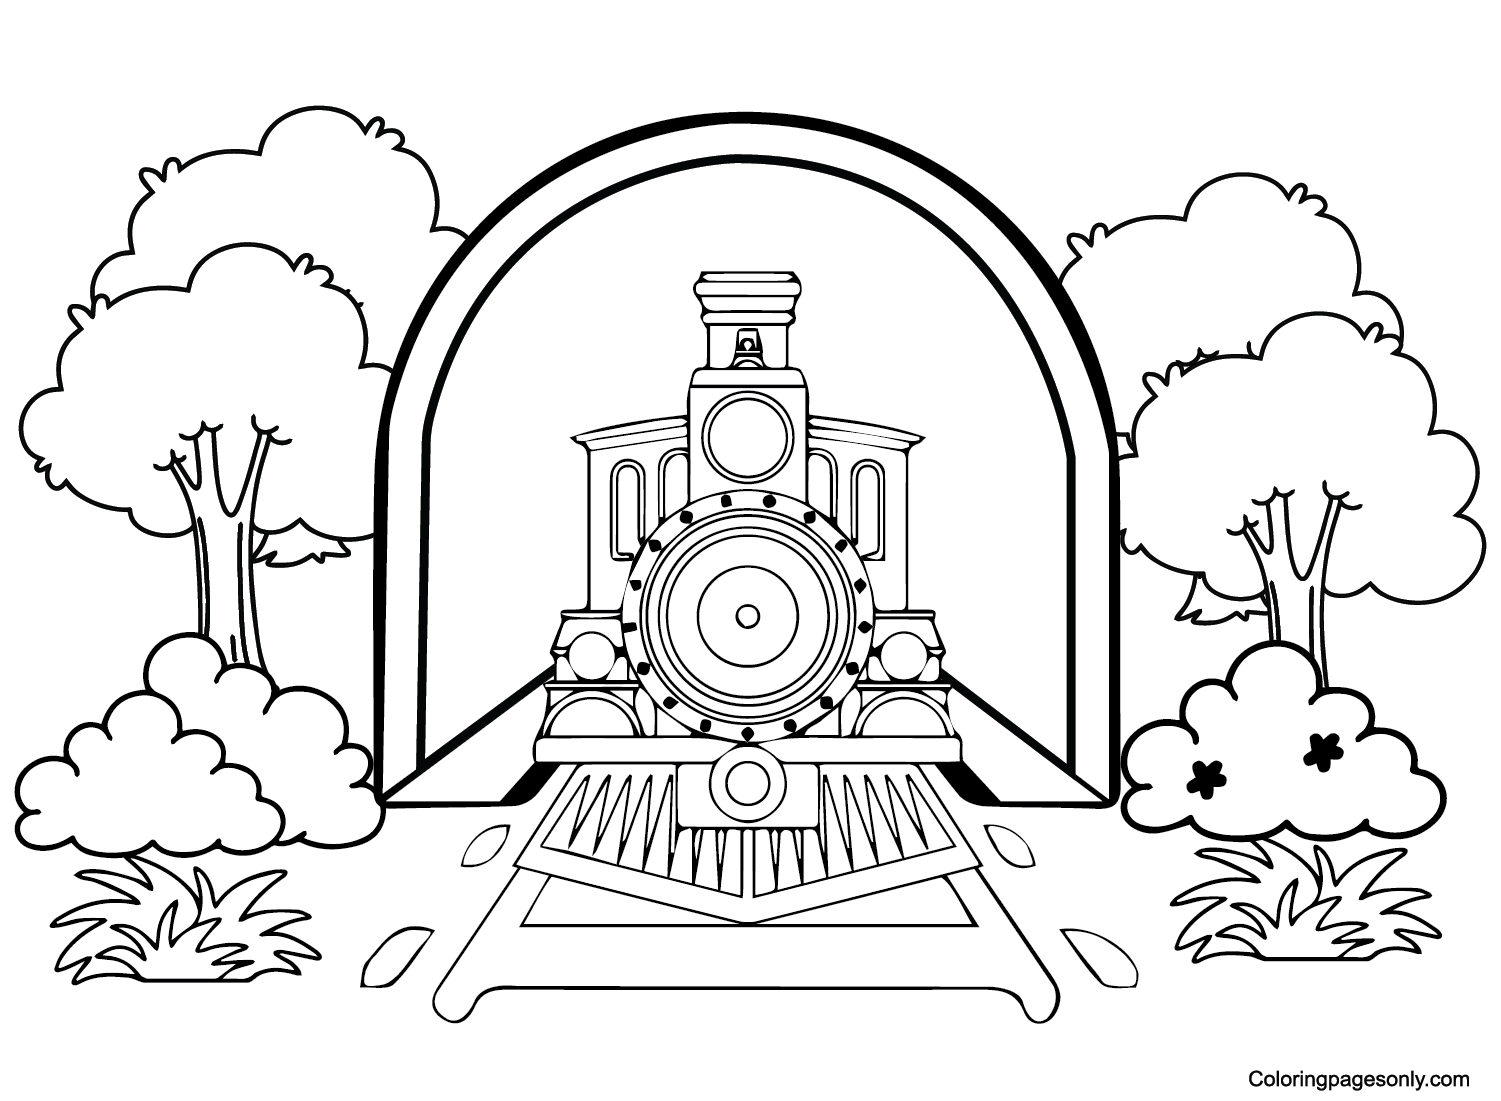 Polar Express color Sheets Coloring Pages